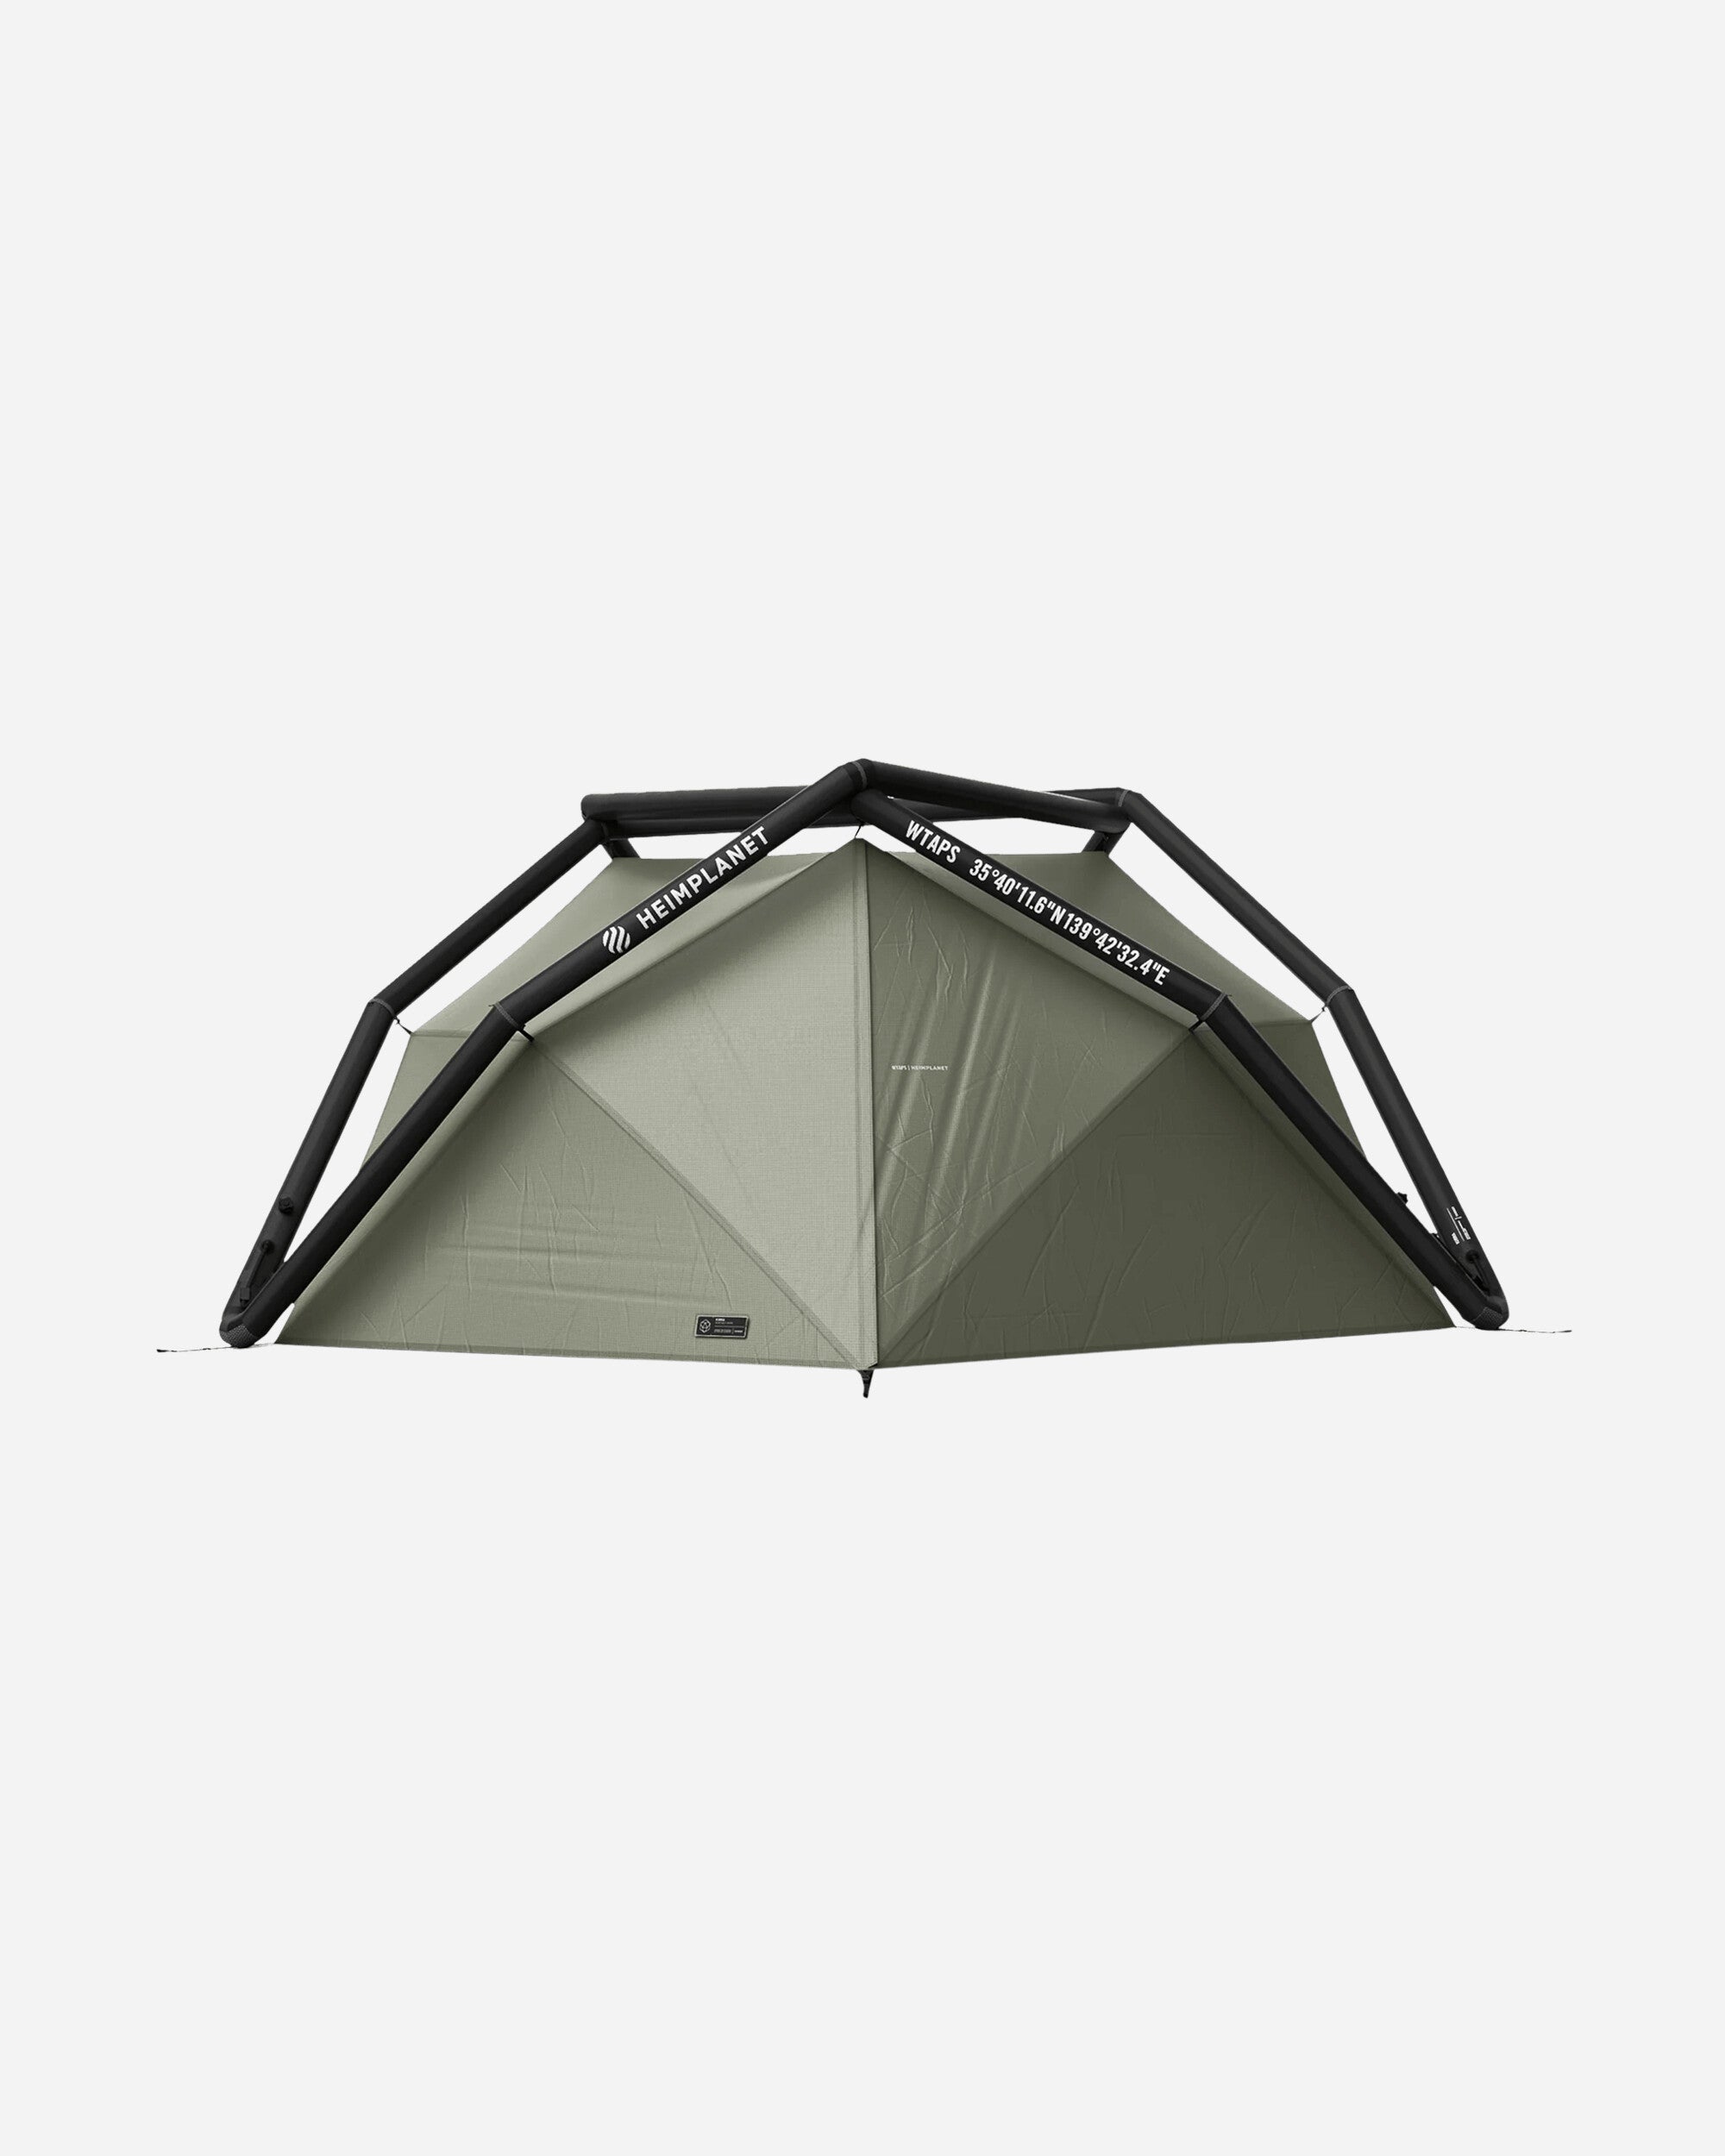 WTAPS Dt Accessories Olive Drab Equipment Tents 241HPHED-AC01 ODR